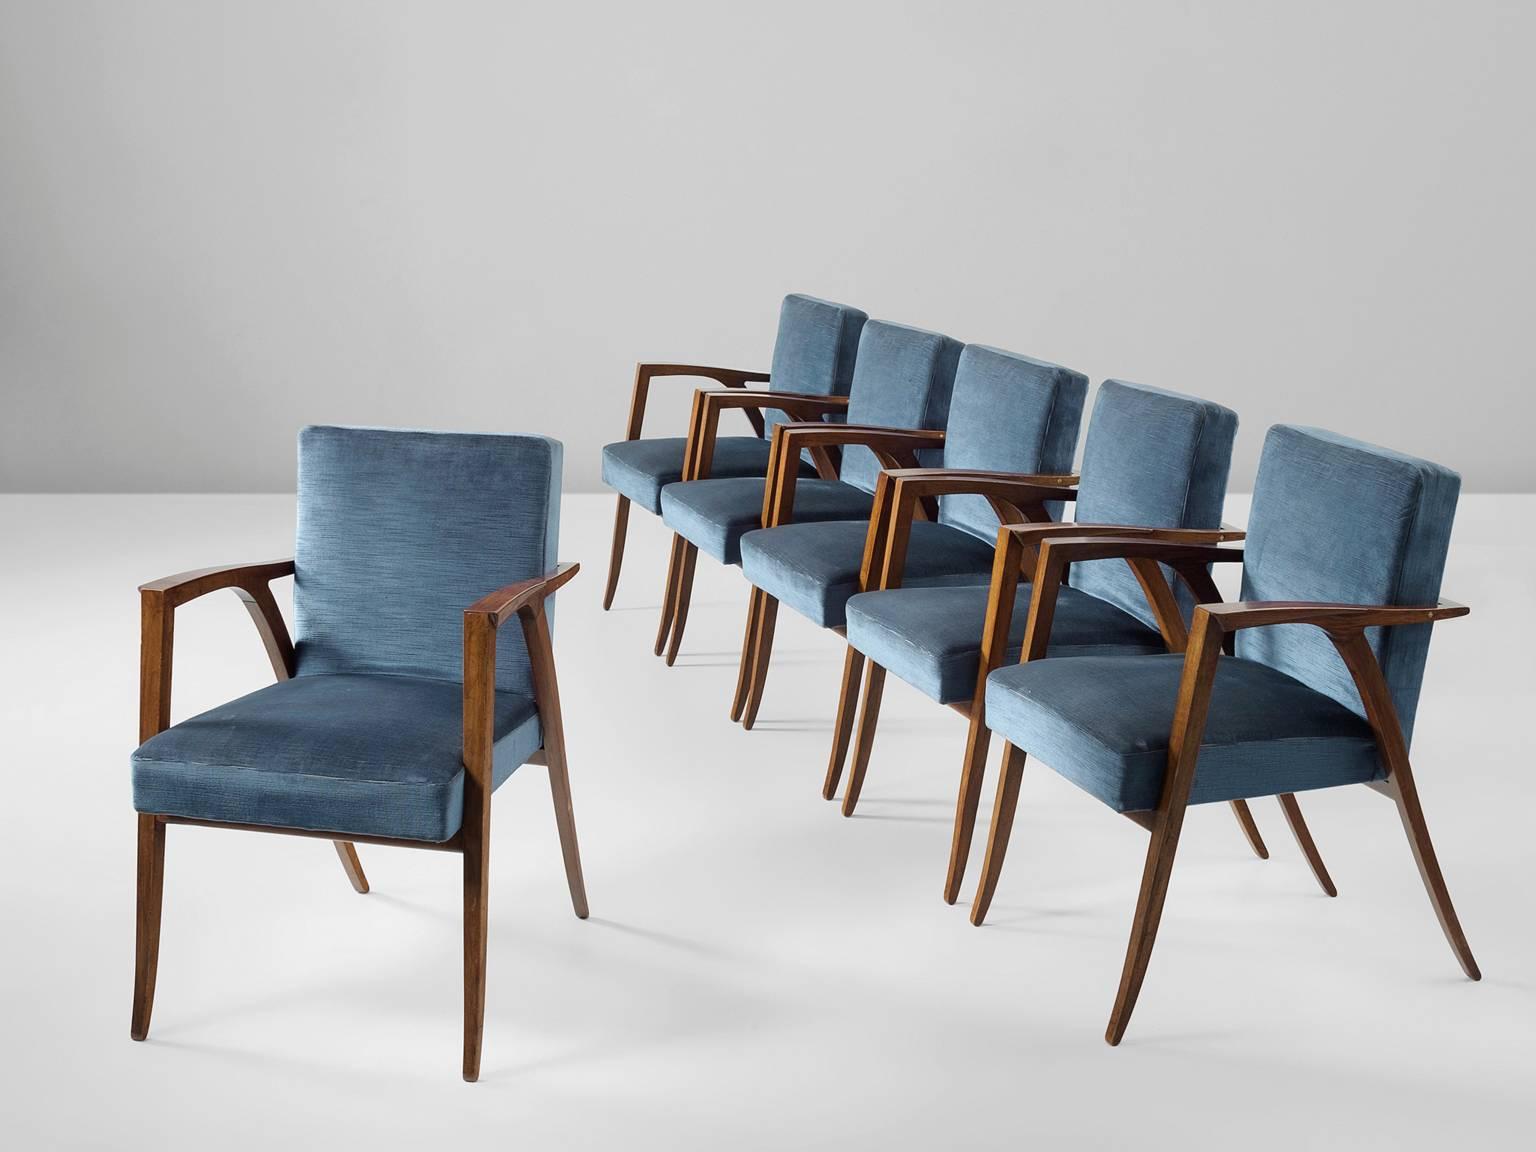 Set of six dining chairs, in rosewood and blue fabric, Italy, 1950s.

Six elegant dining room chairs in rosewood and blue upholstery. These small armchairs have a very elegant design with nicely tapered (almost saber) legs. The horizontal armrests